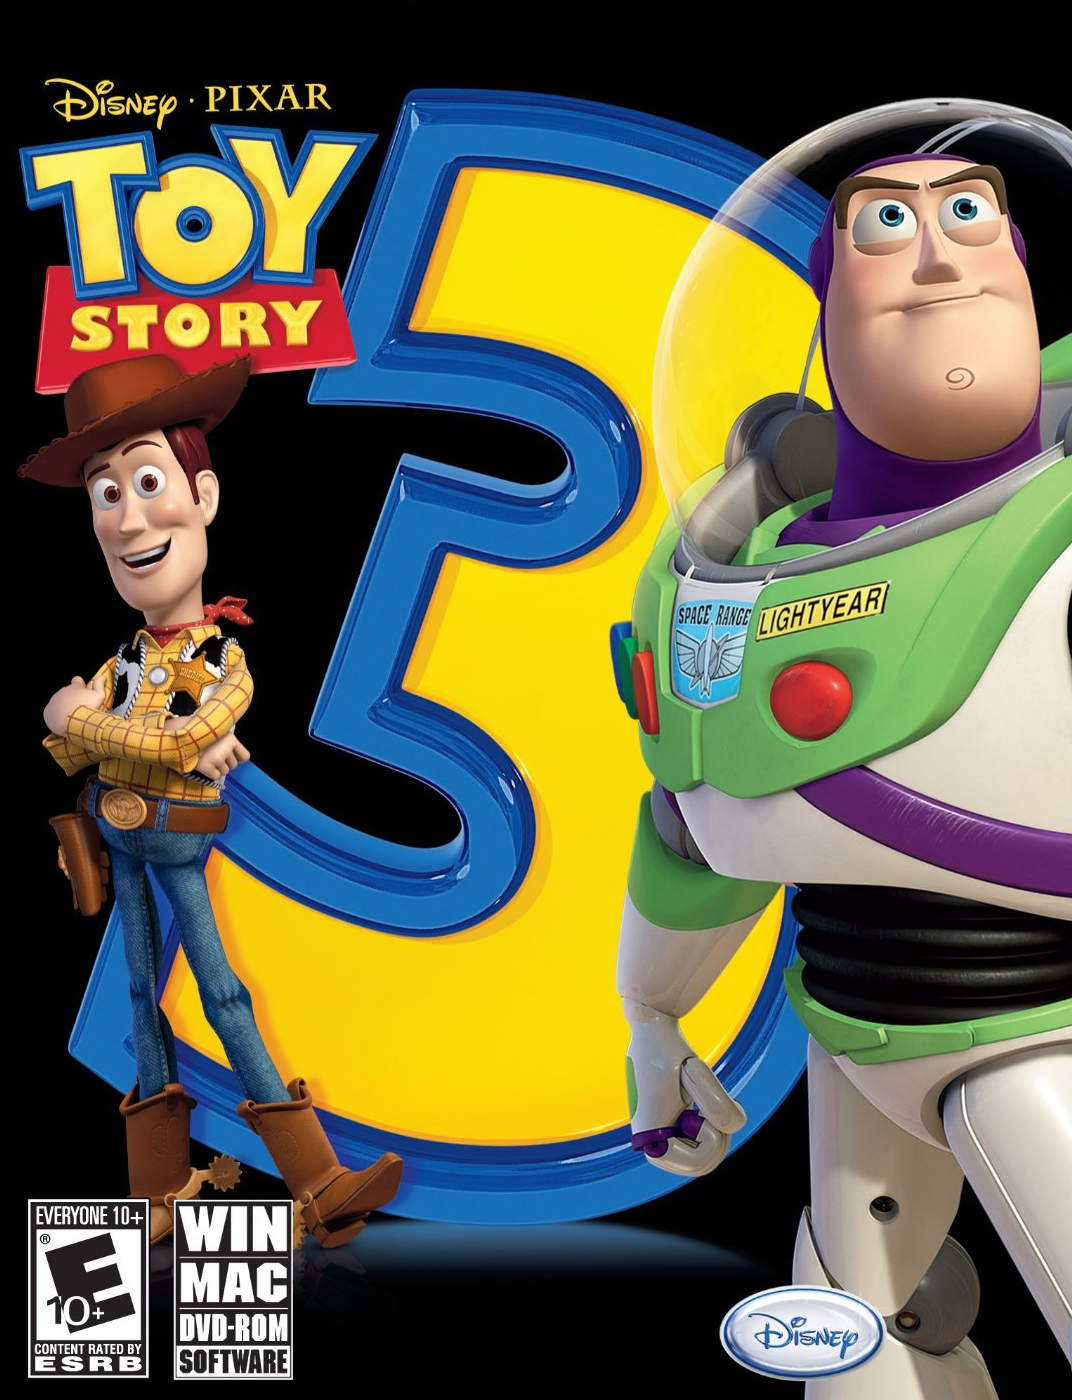 https://static.wikia.nocookie.net/pixar/images/d/d6/Toystory3videogamecoverart.png/revision/latest?cb=20230208221704